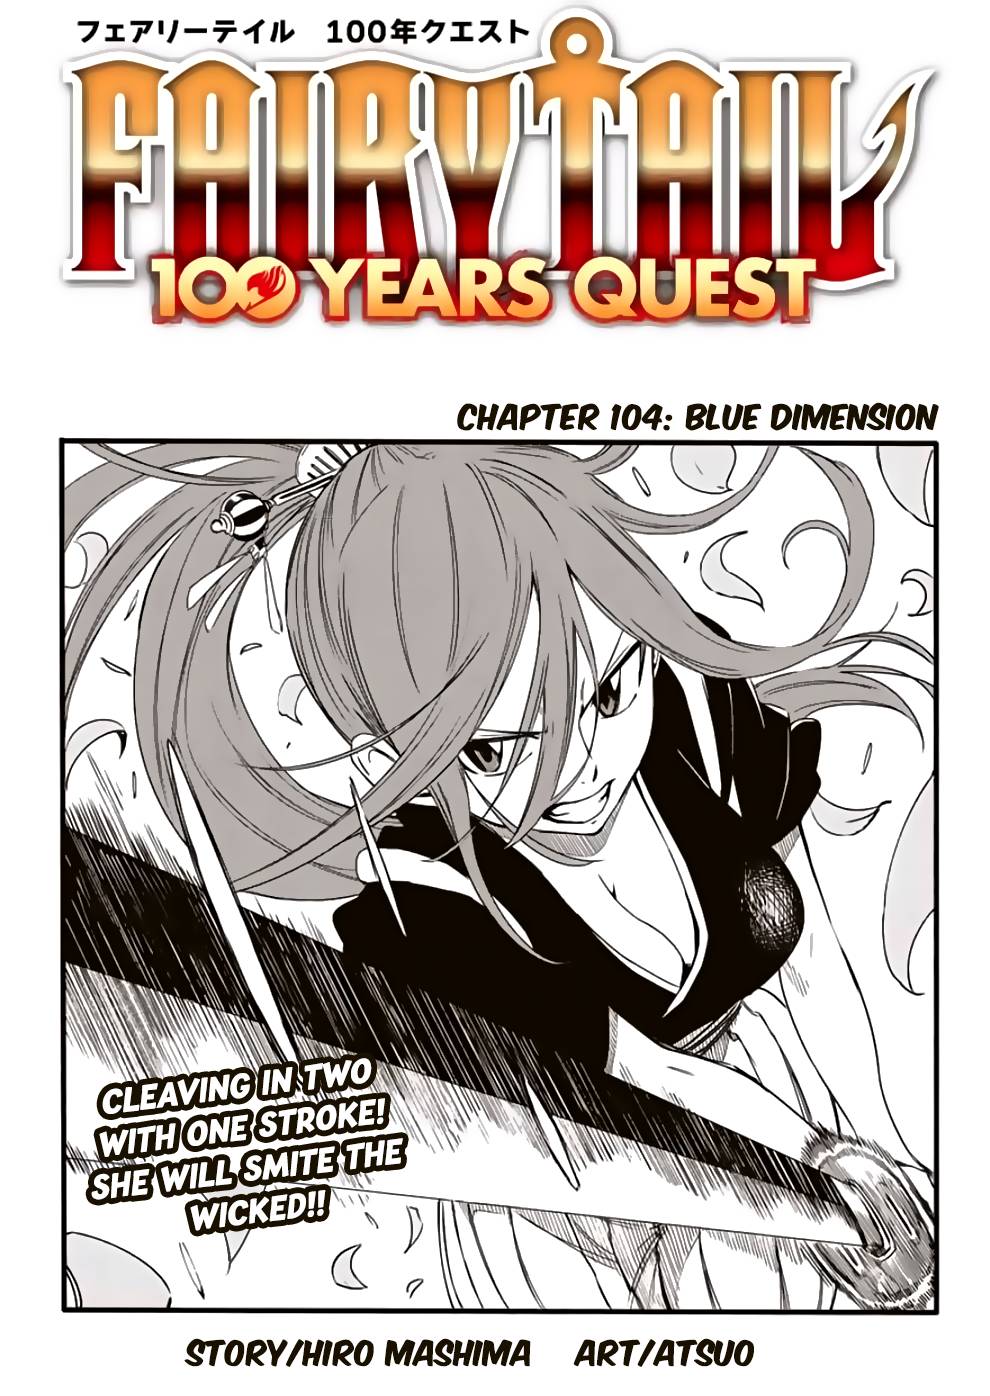 Fairy Tail: 100 Years Quest Chapter 114, Fairy Tail Wiki